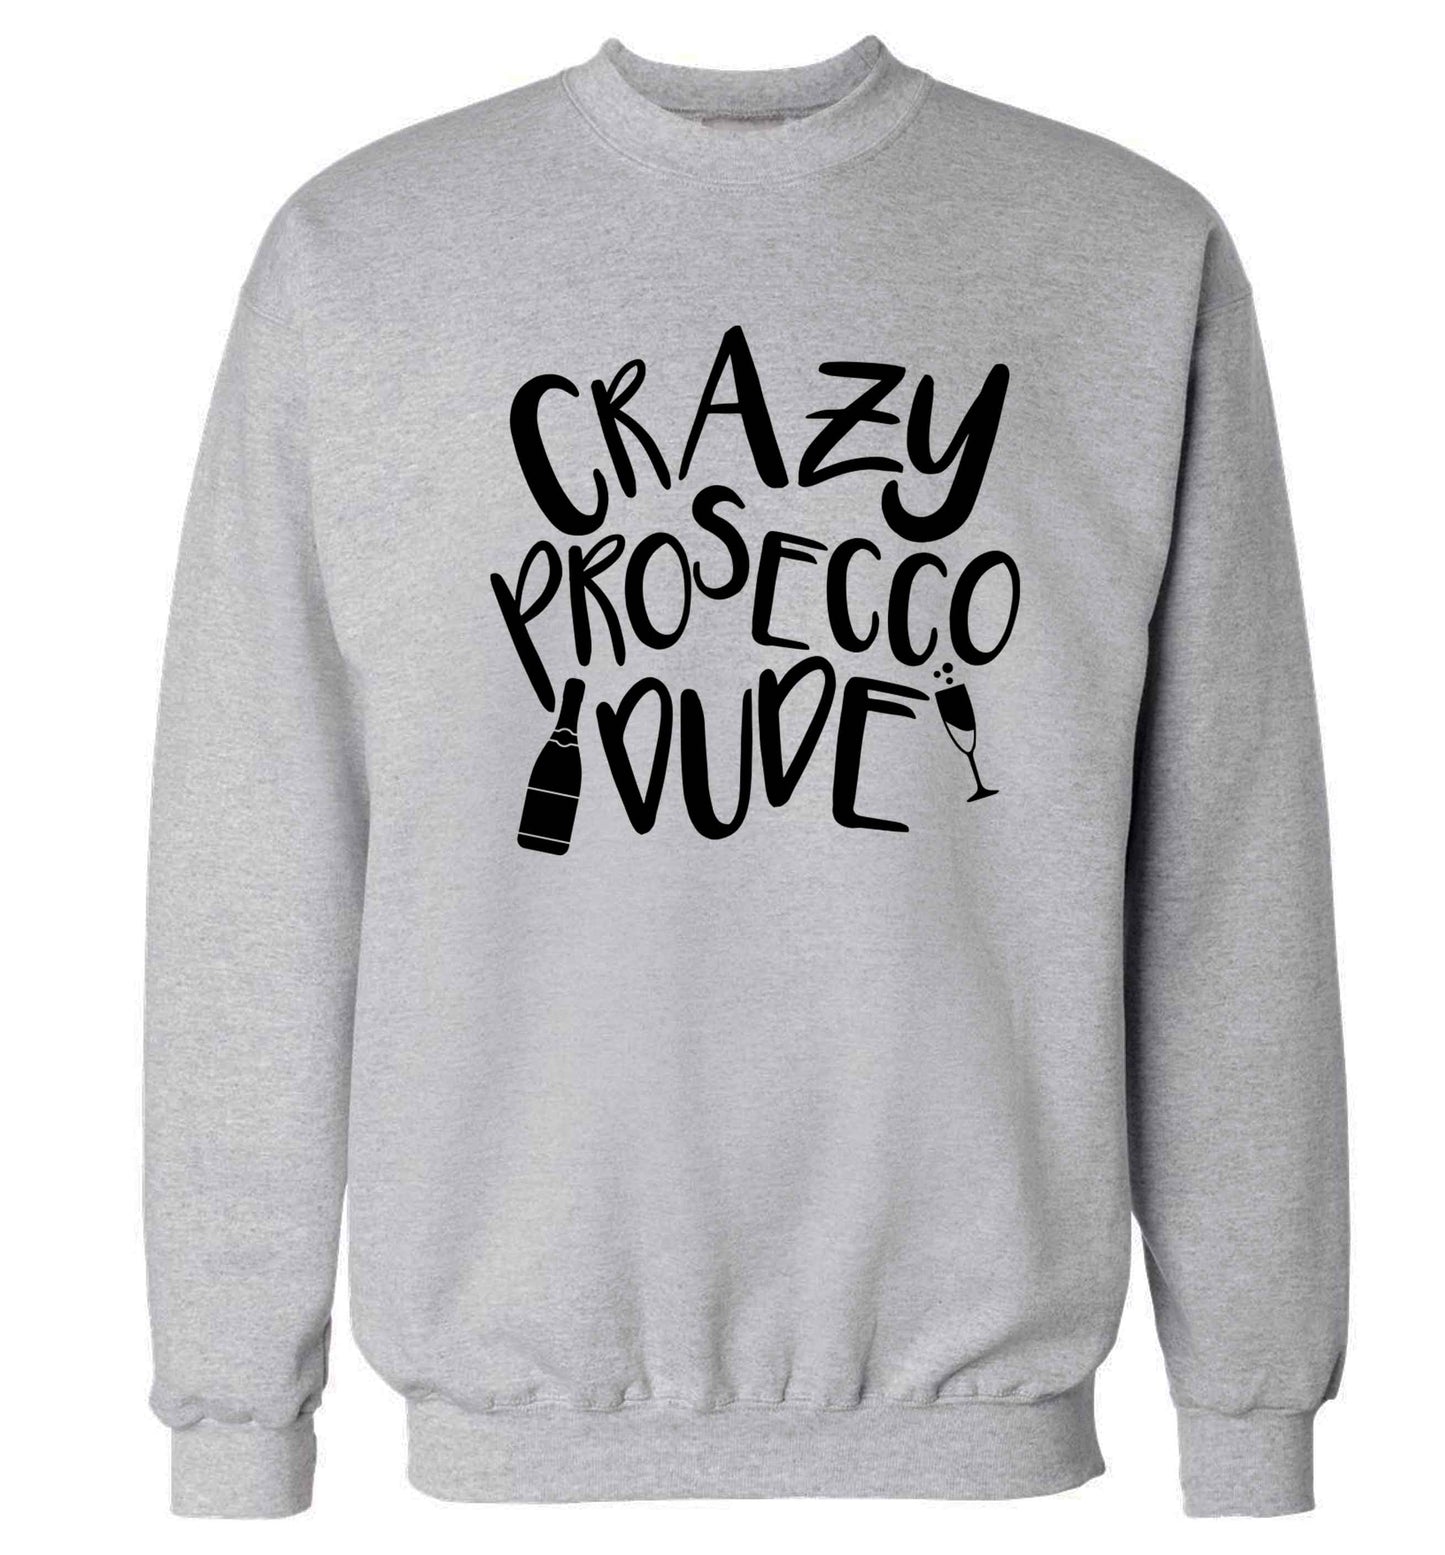 Crazy prosecco dude Adult's unisex grey Sweater 2XL